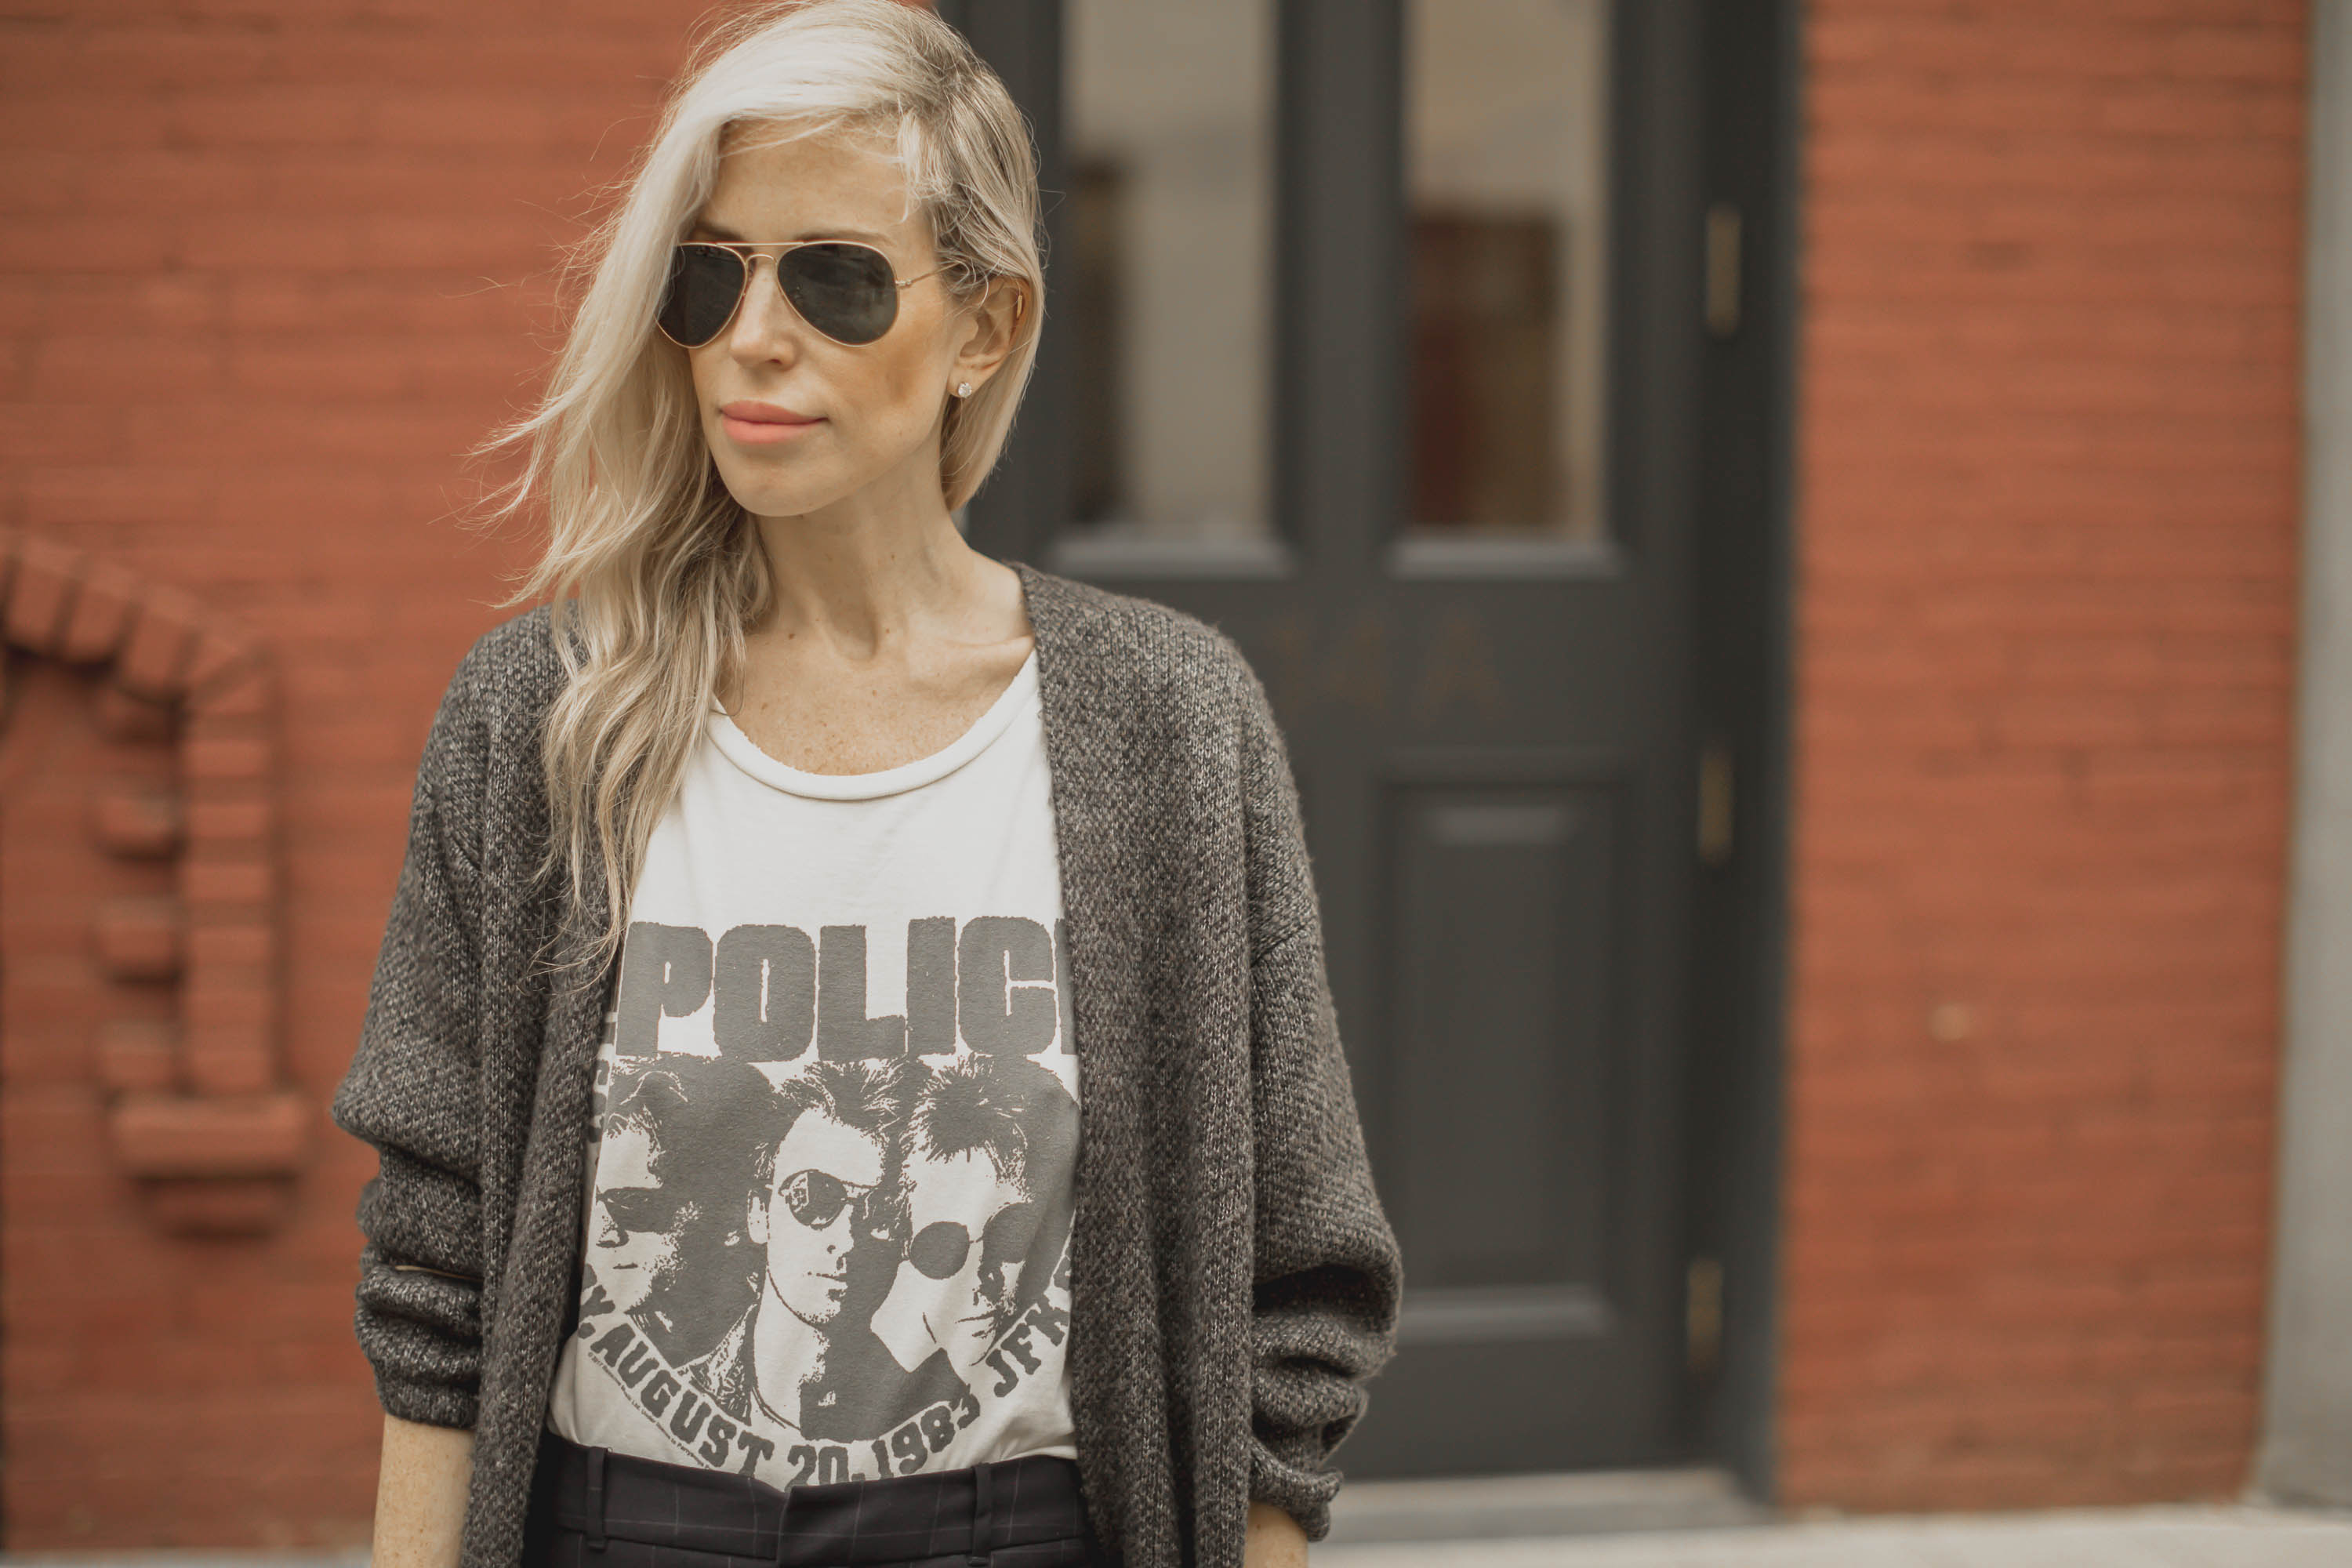 junk-food-clothing-the-police-yael-steren